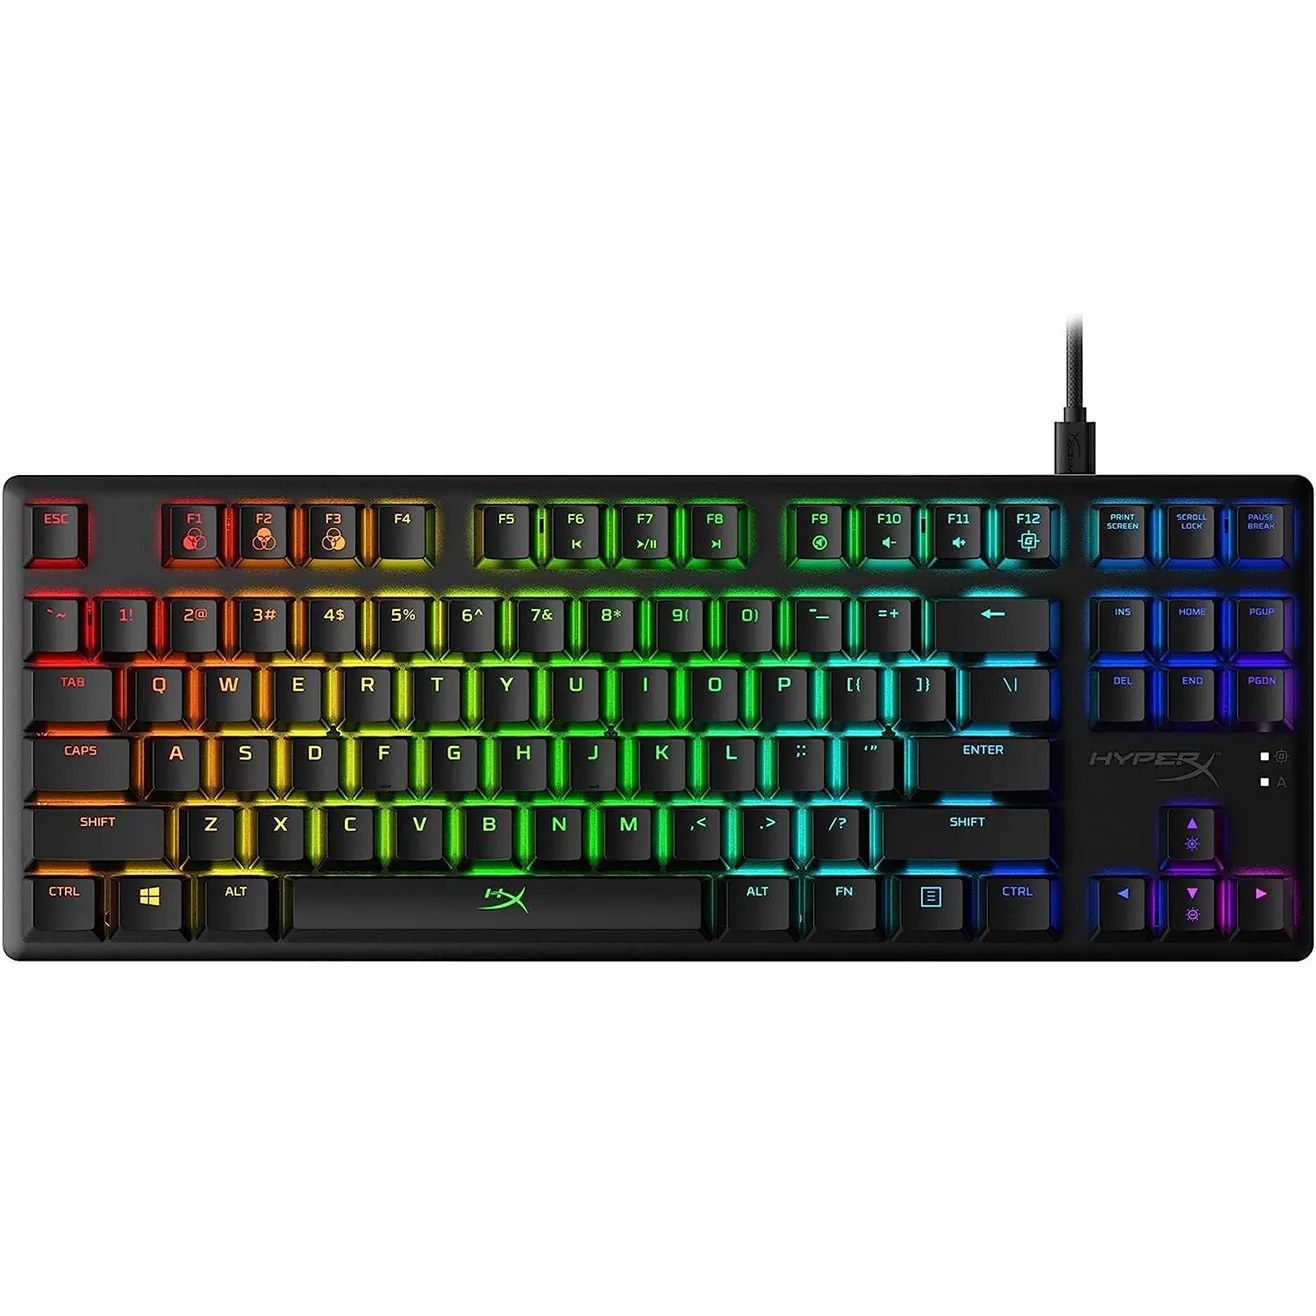 HyperX Alloy Origins Core Blue TKL RGB mini keyboard and mouse for mobile gaming one hand gaming keyboard mechanical